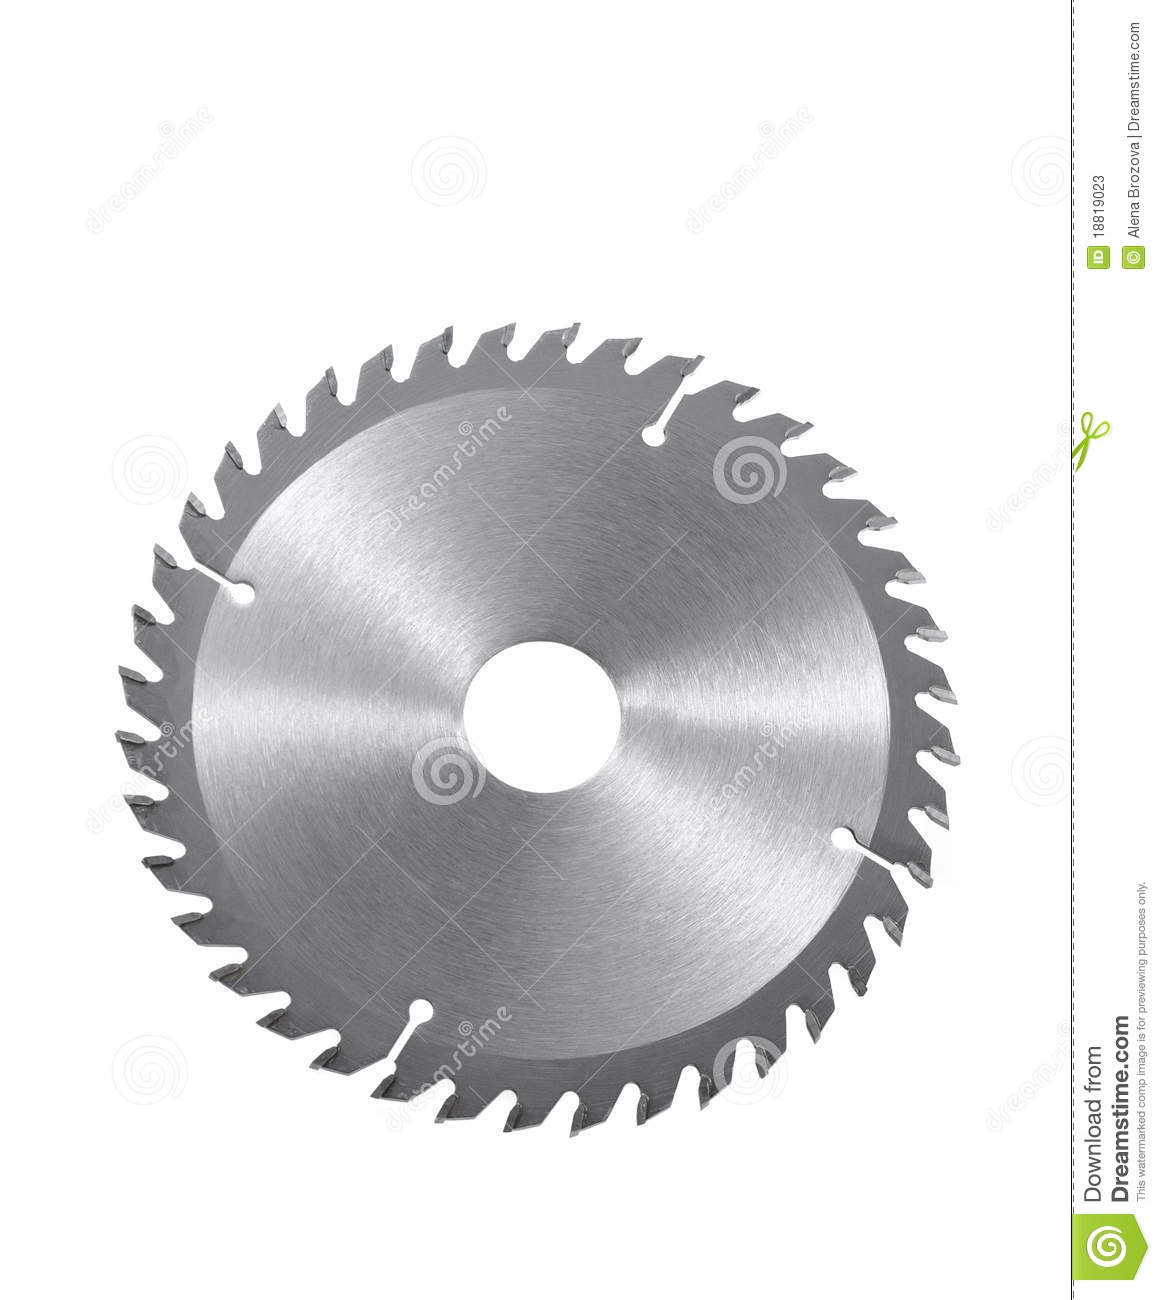 Circular Saw Blade For Wood Isolated On White Stock Photos   Image